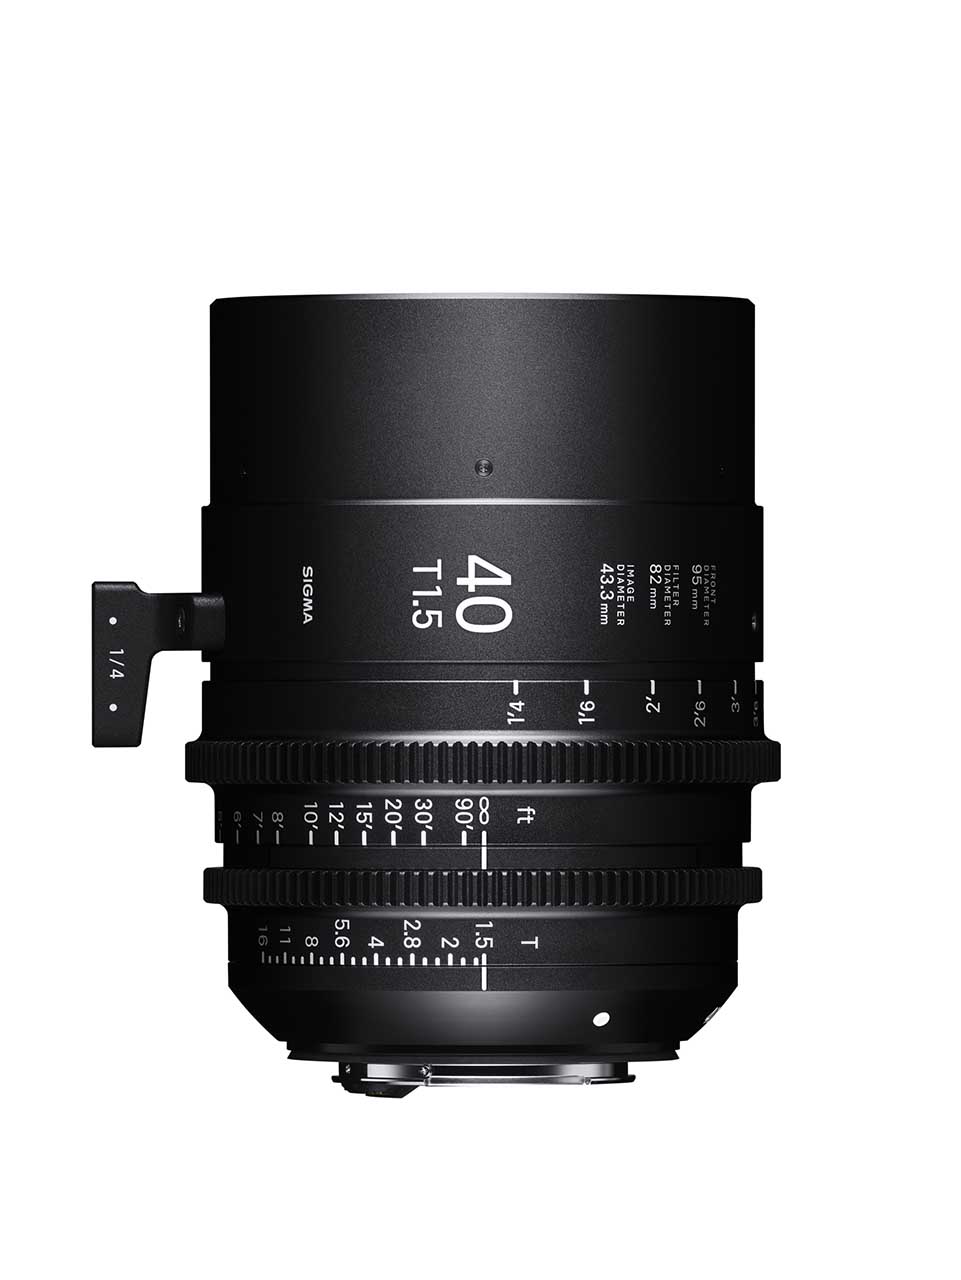 Sigma launches 28mm T1.5 FF, 40mm T1.5 FF, 105mm T1.5 FF cine lenses